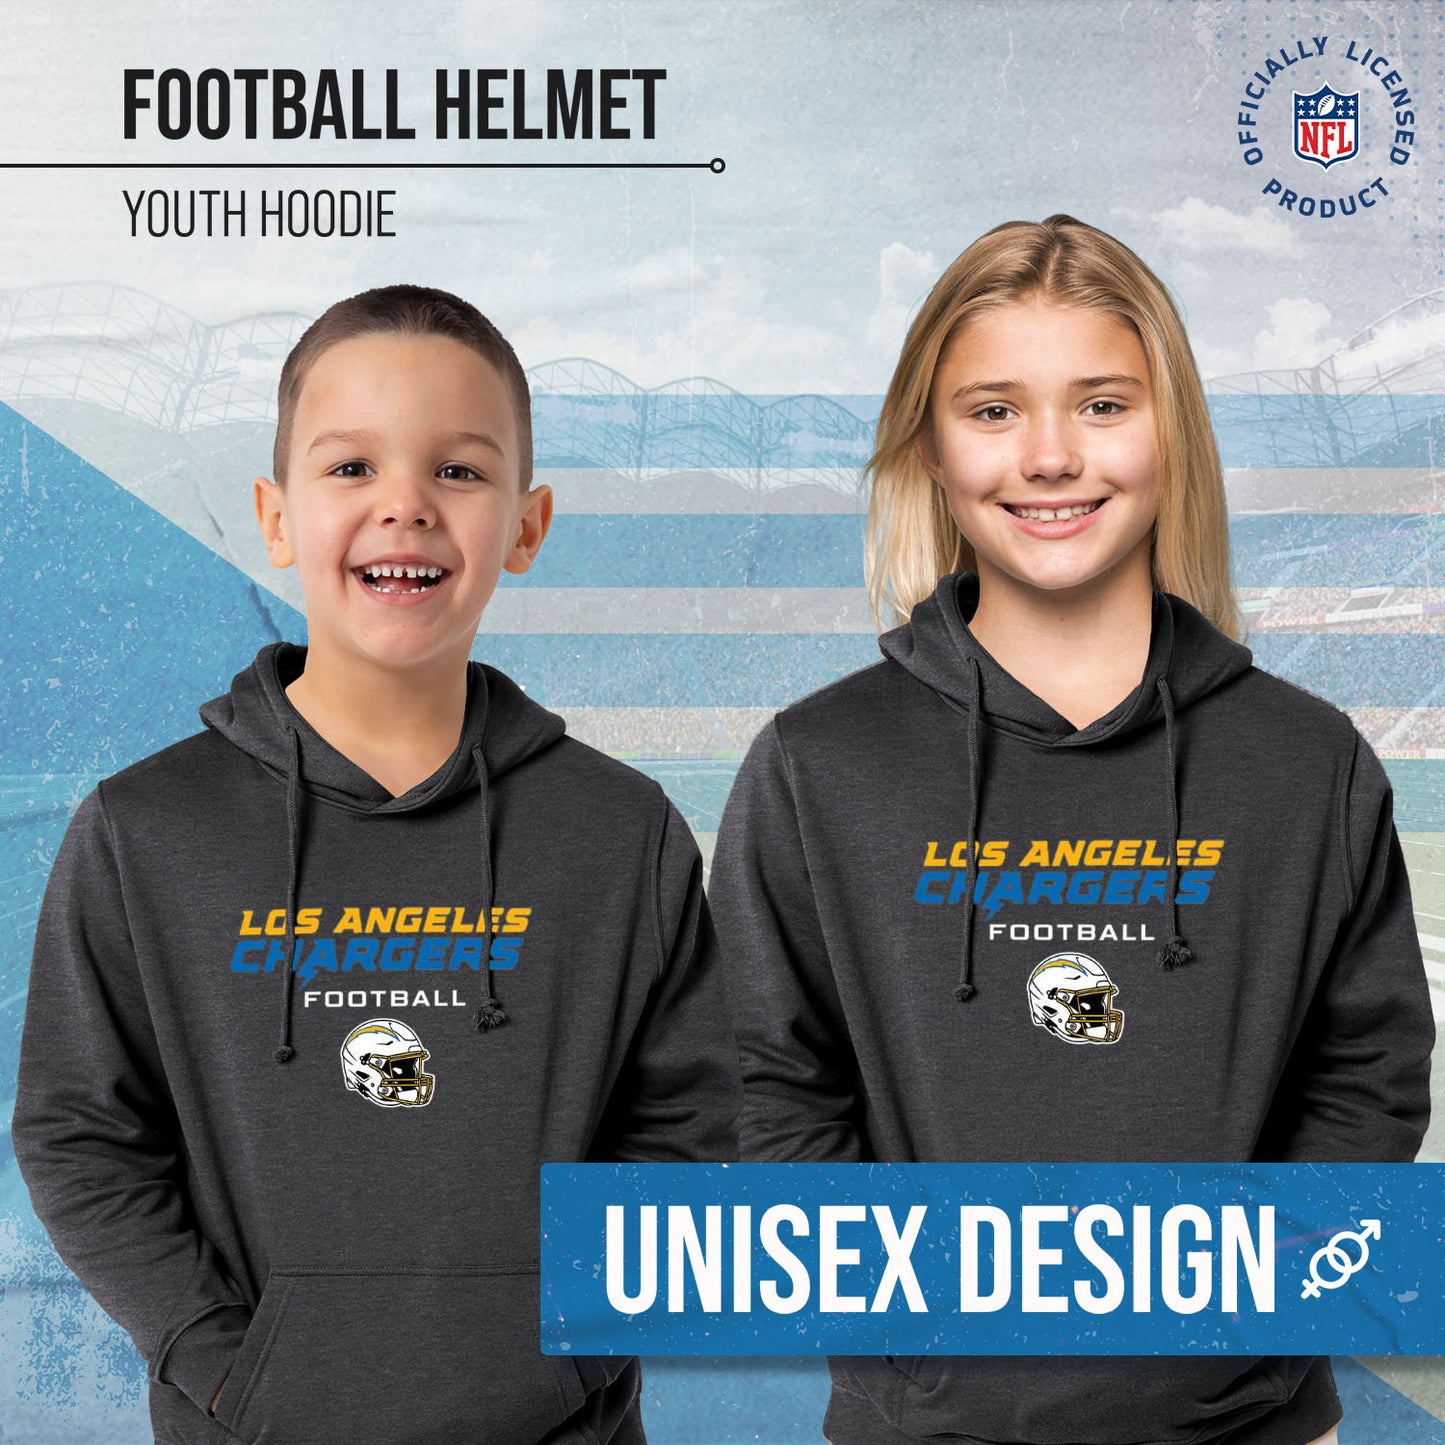 Los Angeles Chargers NFL Youth Football Helmet Hood - Charcoal